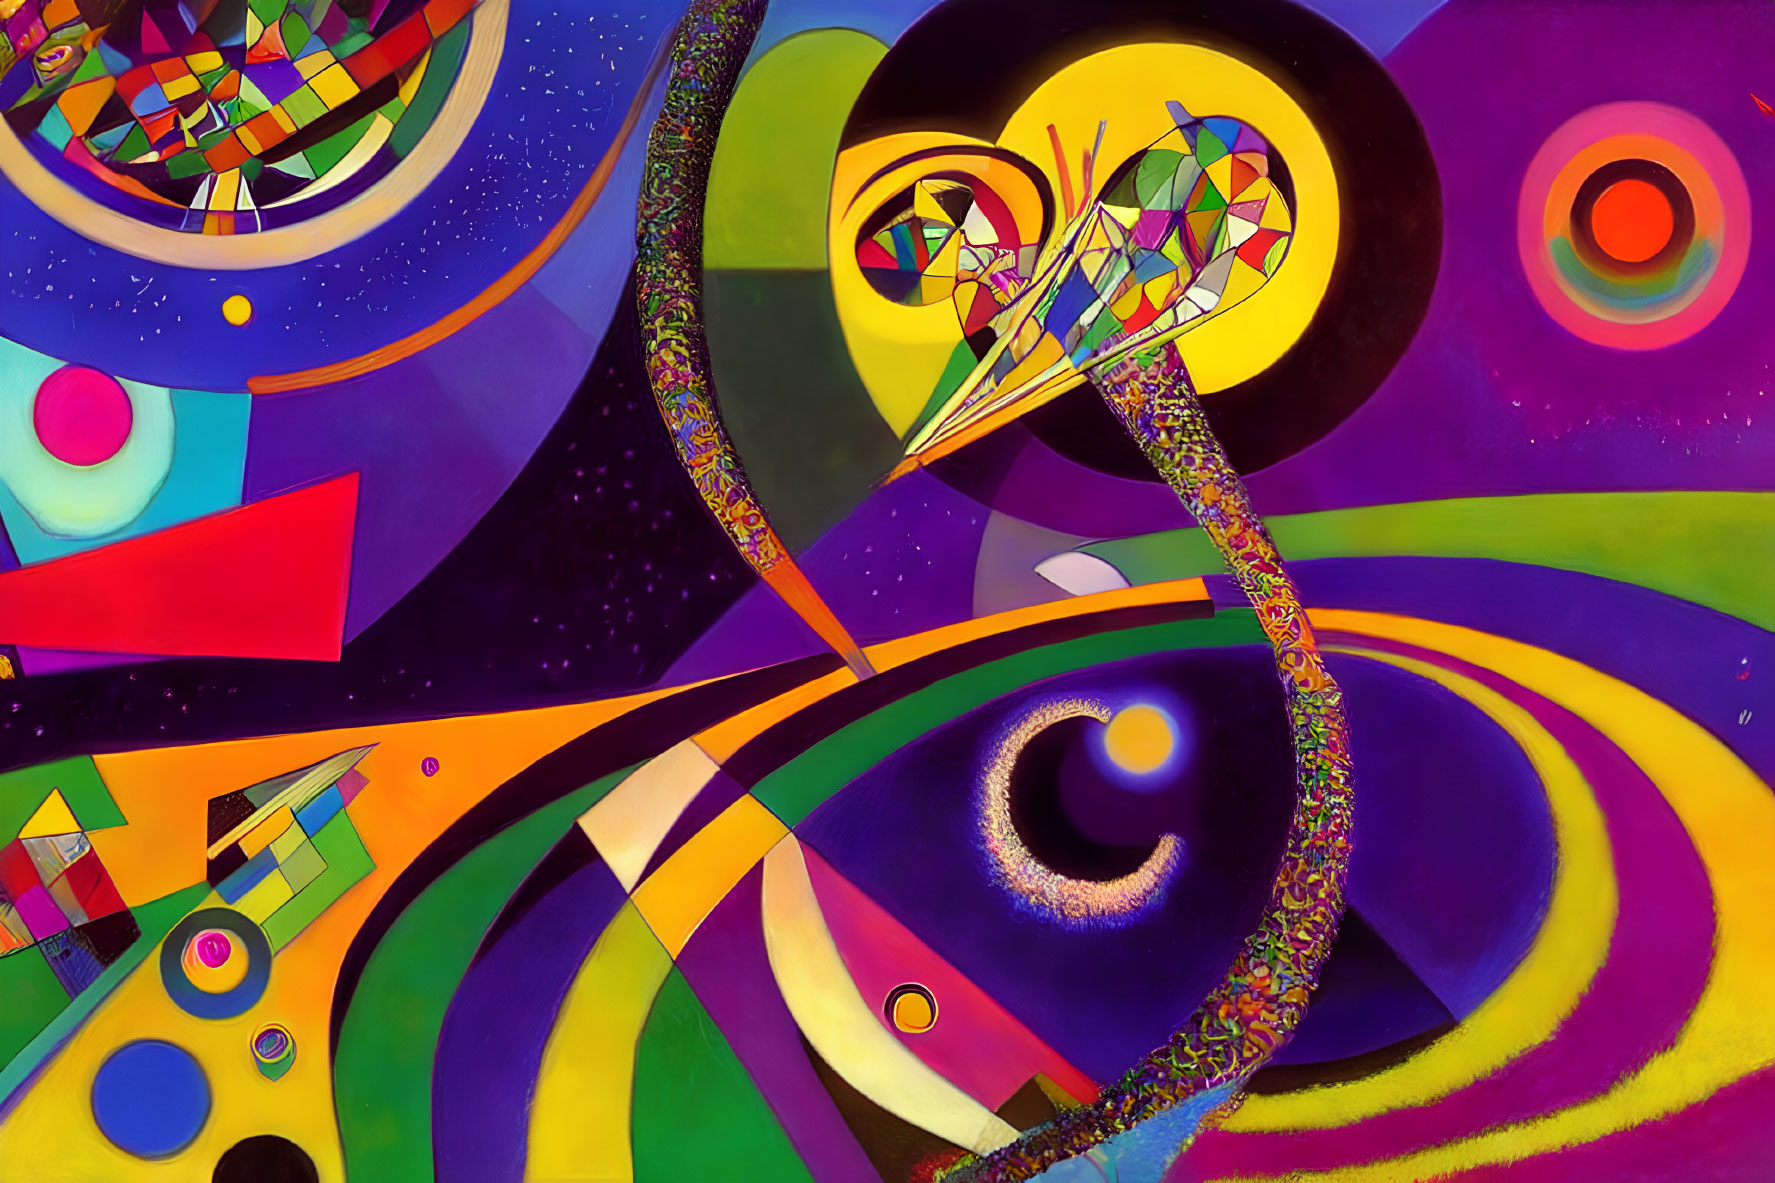 Colorful Abstract Painting with Swirling Patterns and Geometric Shapes